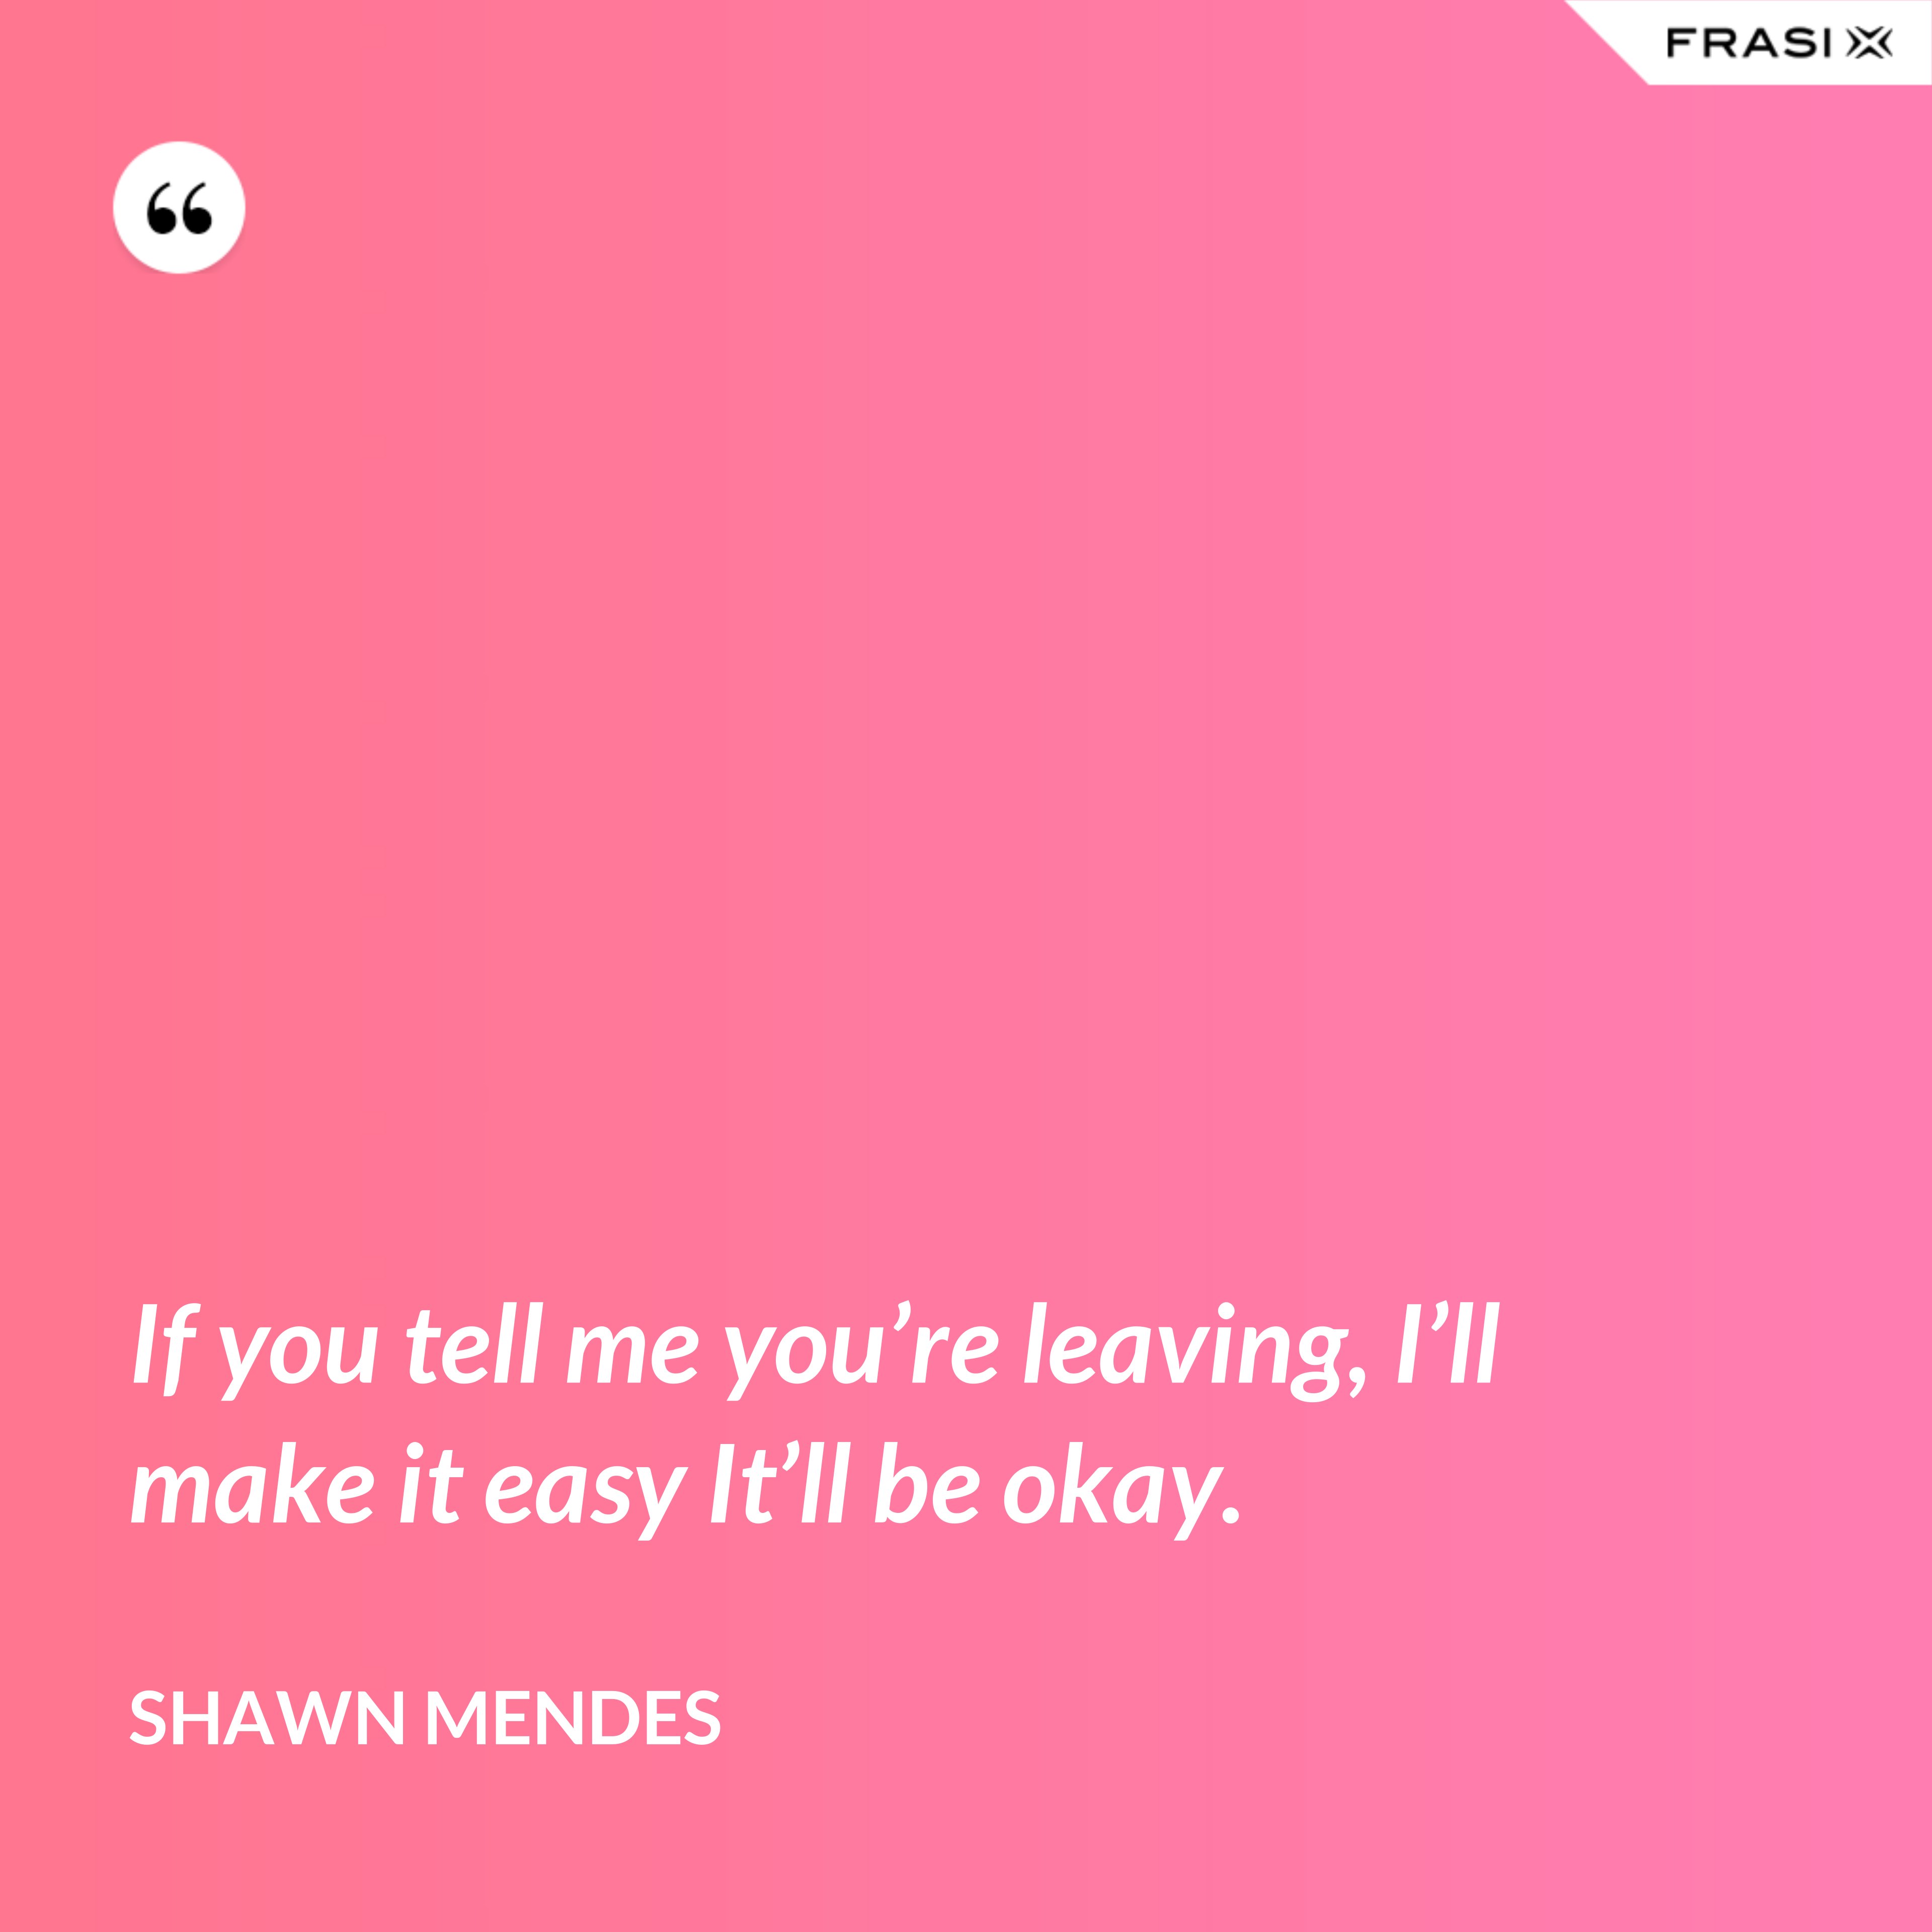 If you tell me you’re leaving, I’ll make it easy It’ll be okay. - Shawn Mendes